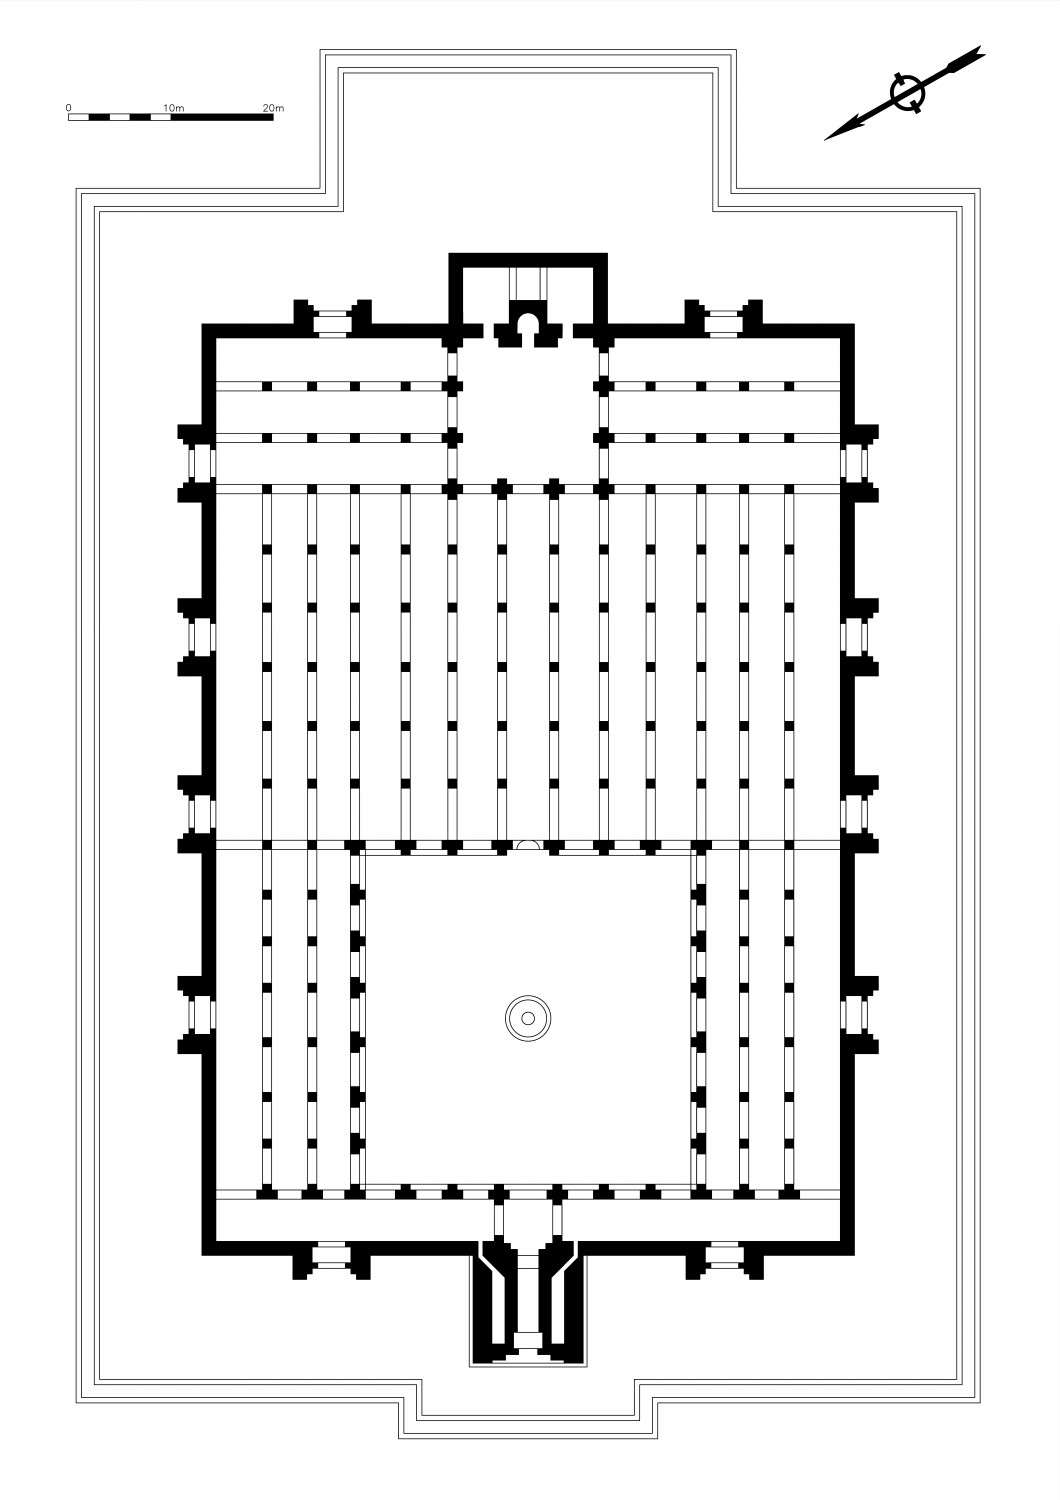 Site plan of the mosque, Based on Marçais (1954)